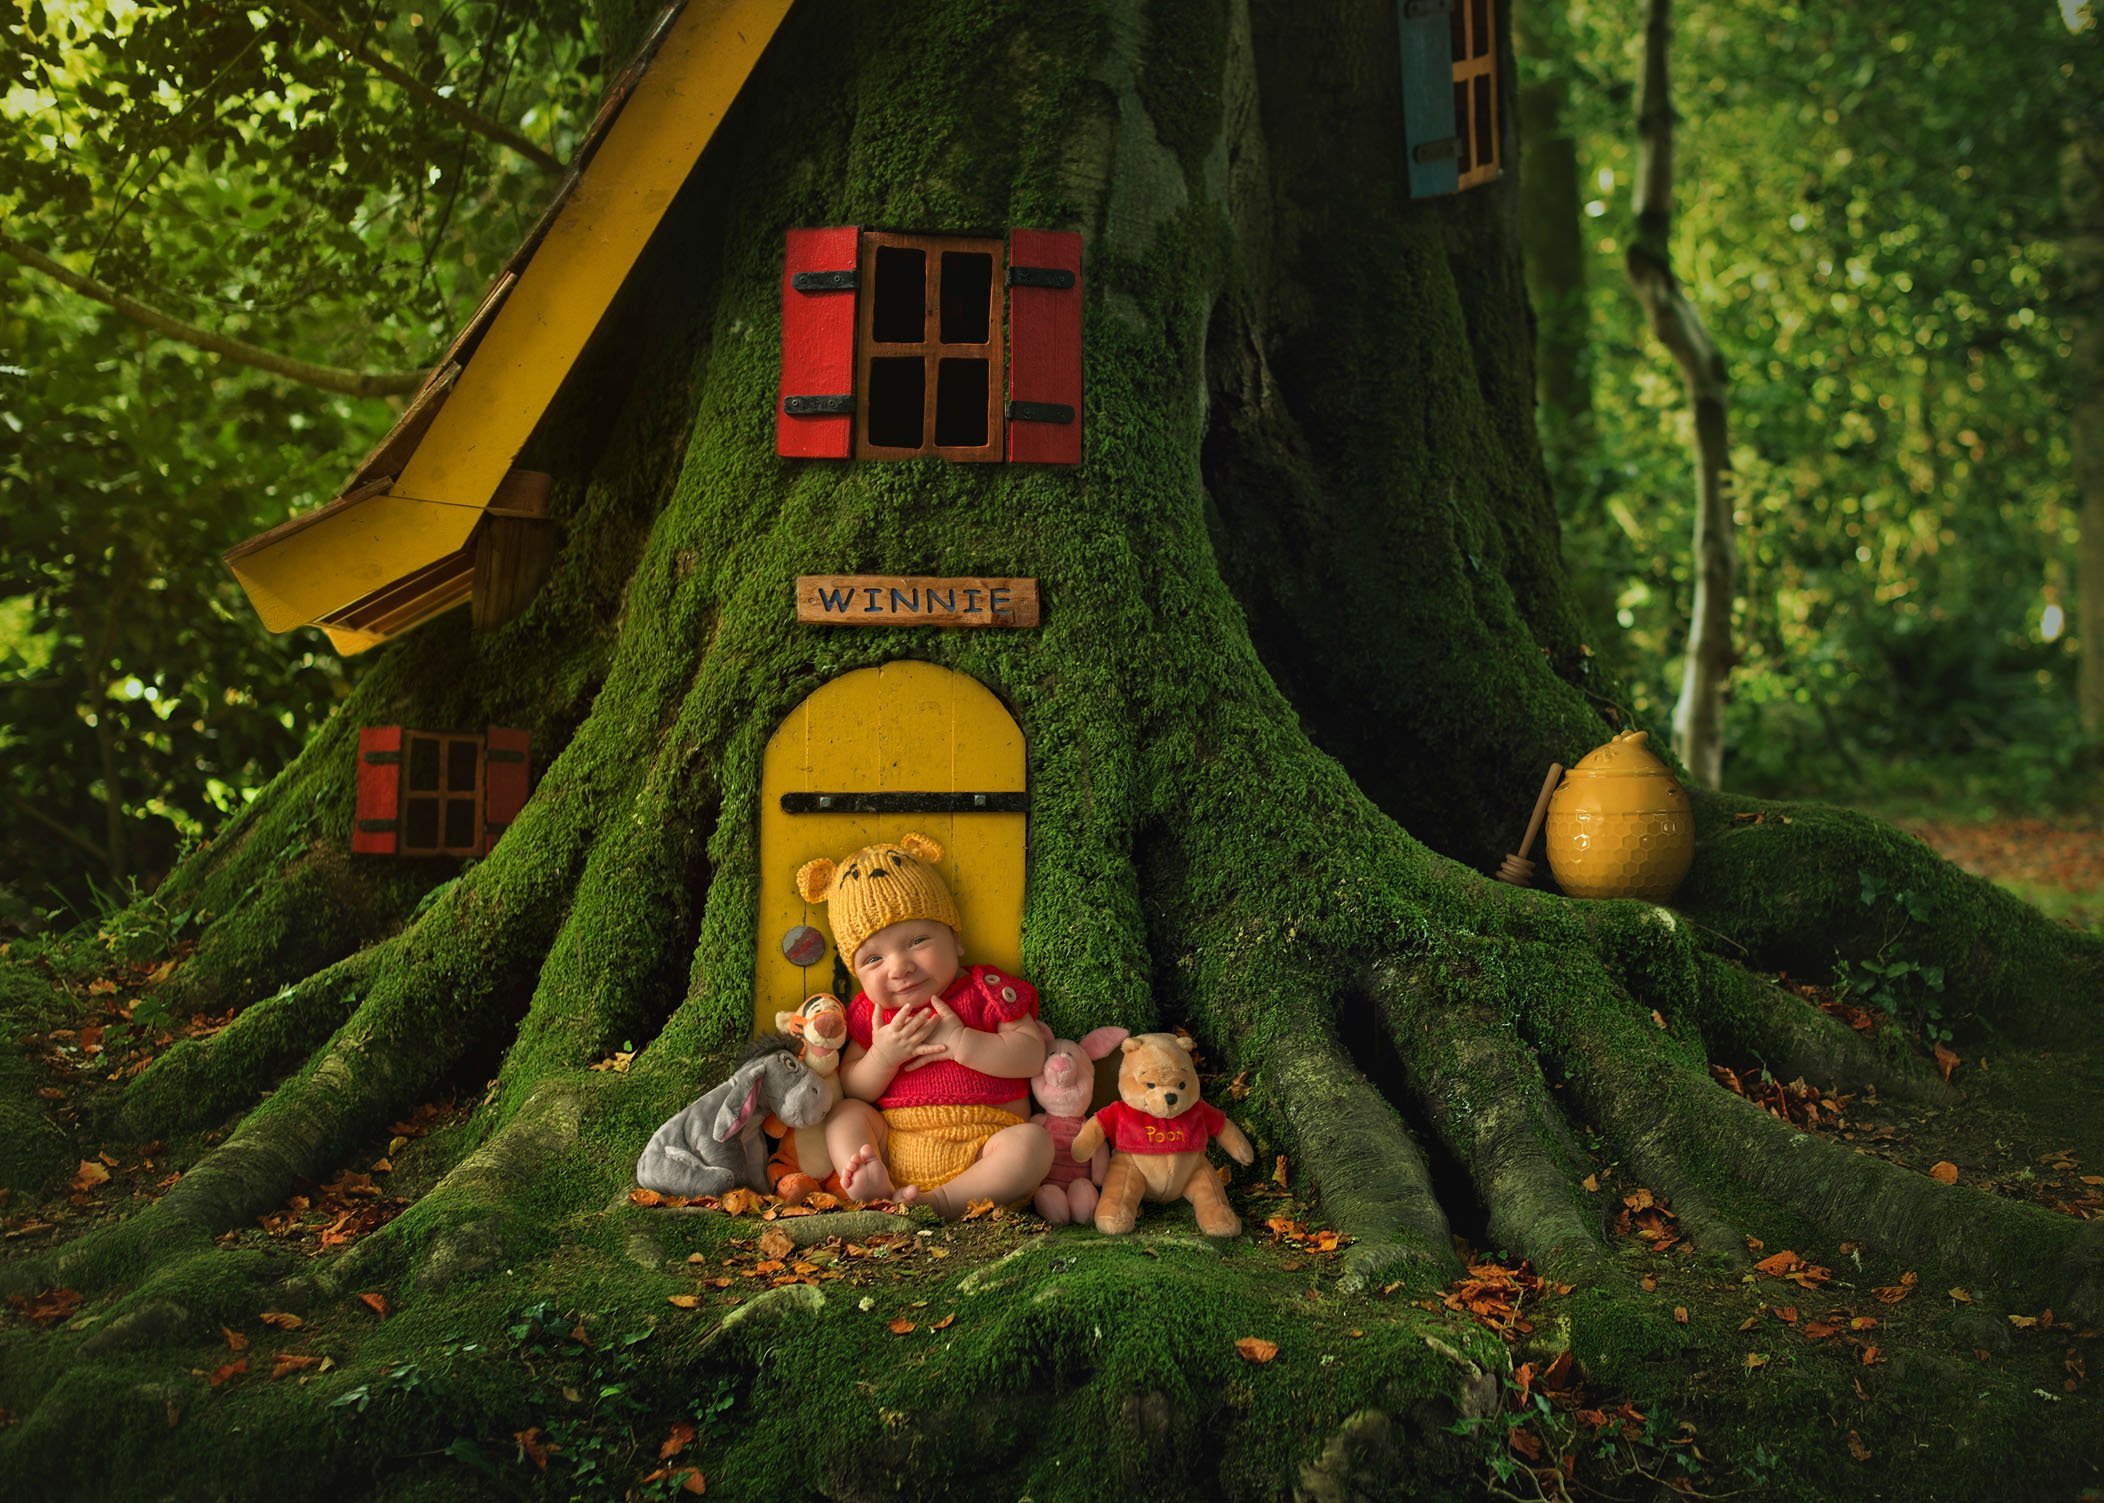 Newborn baby boy sitting in front of Winnie the Pooh's house with all his stuffed animal friends